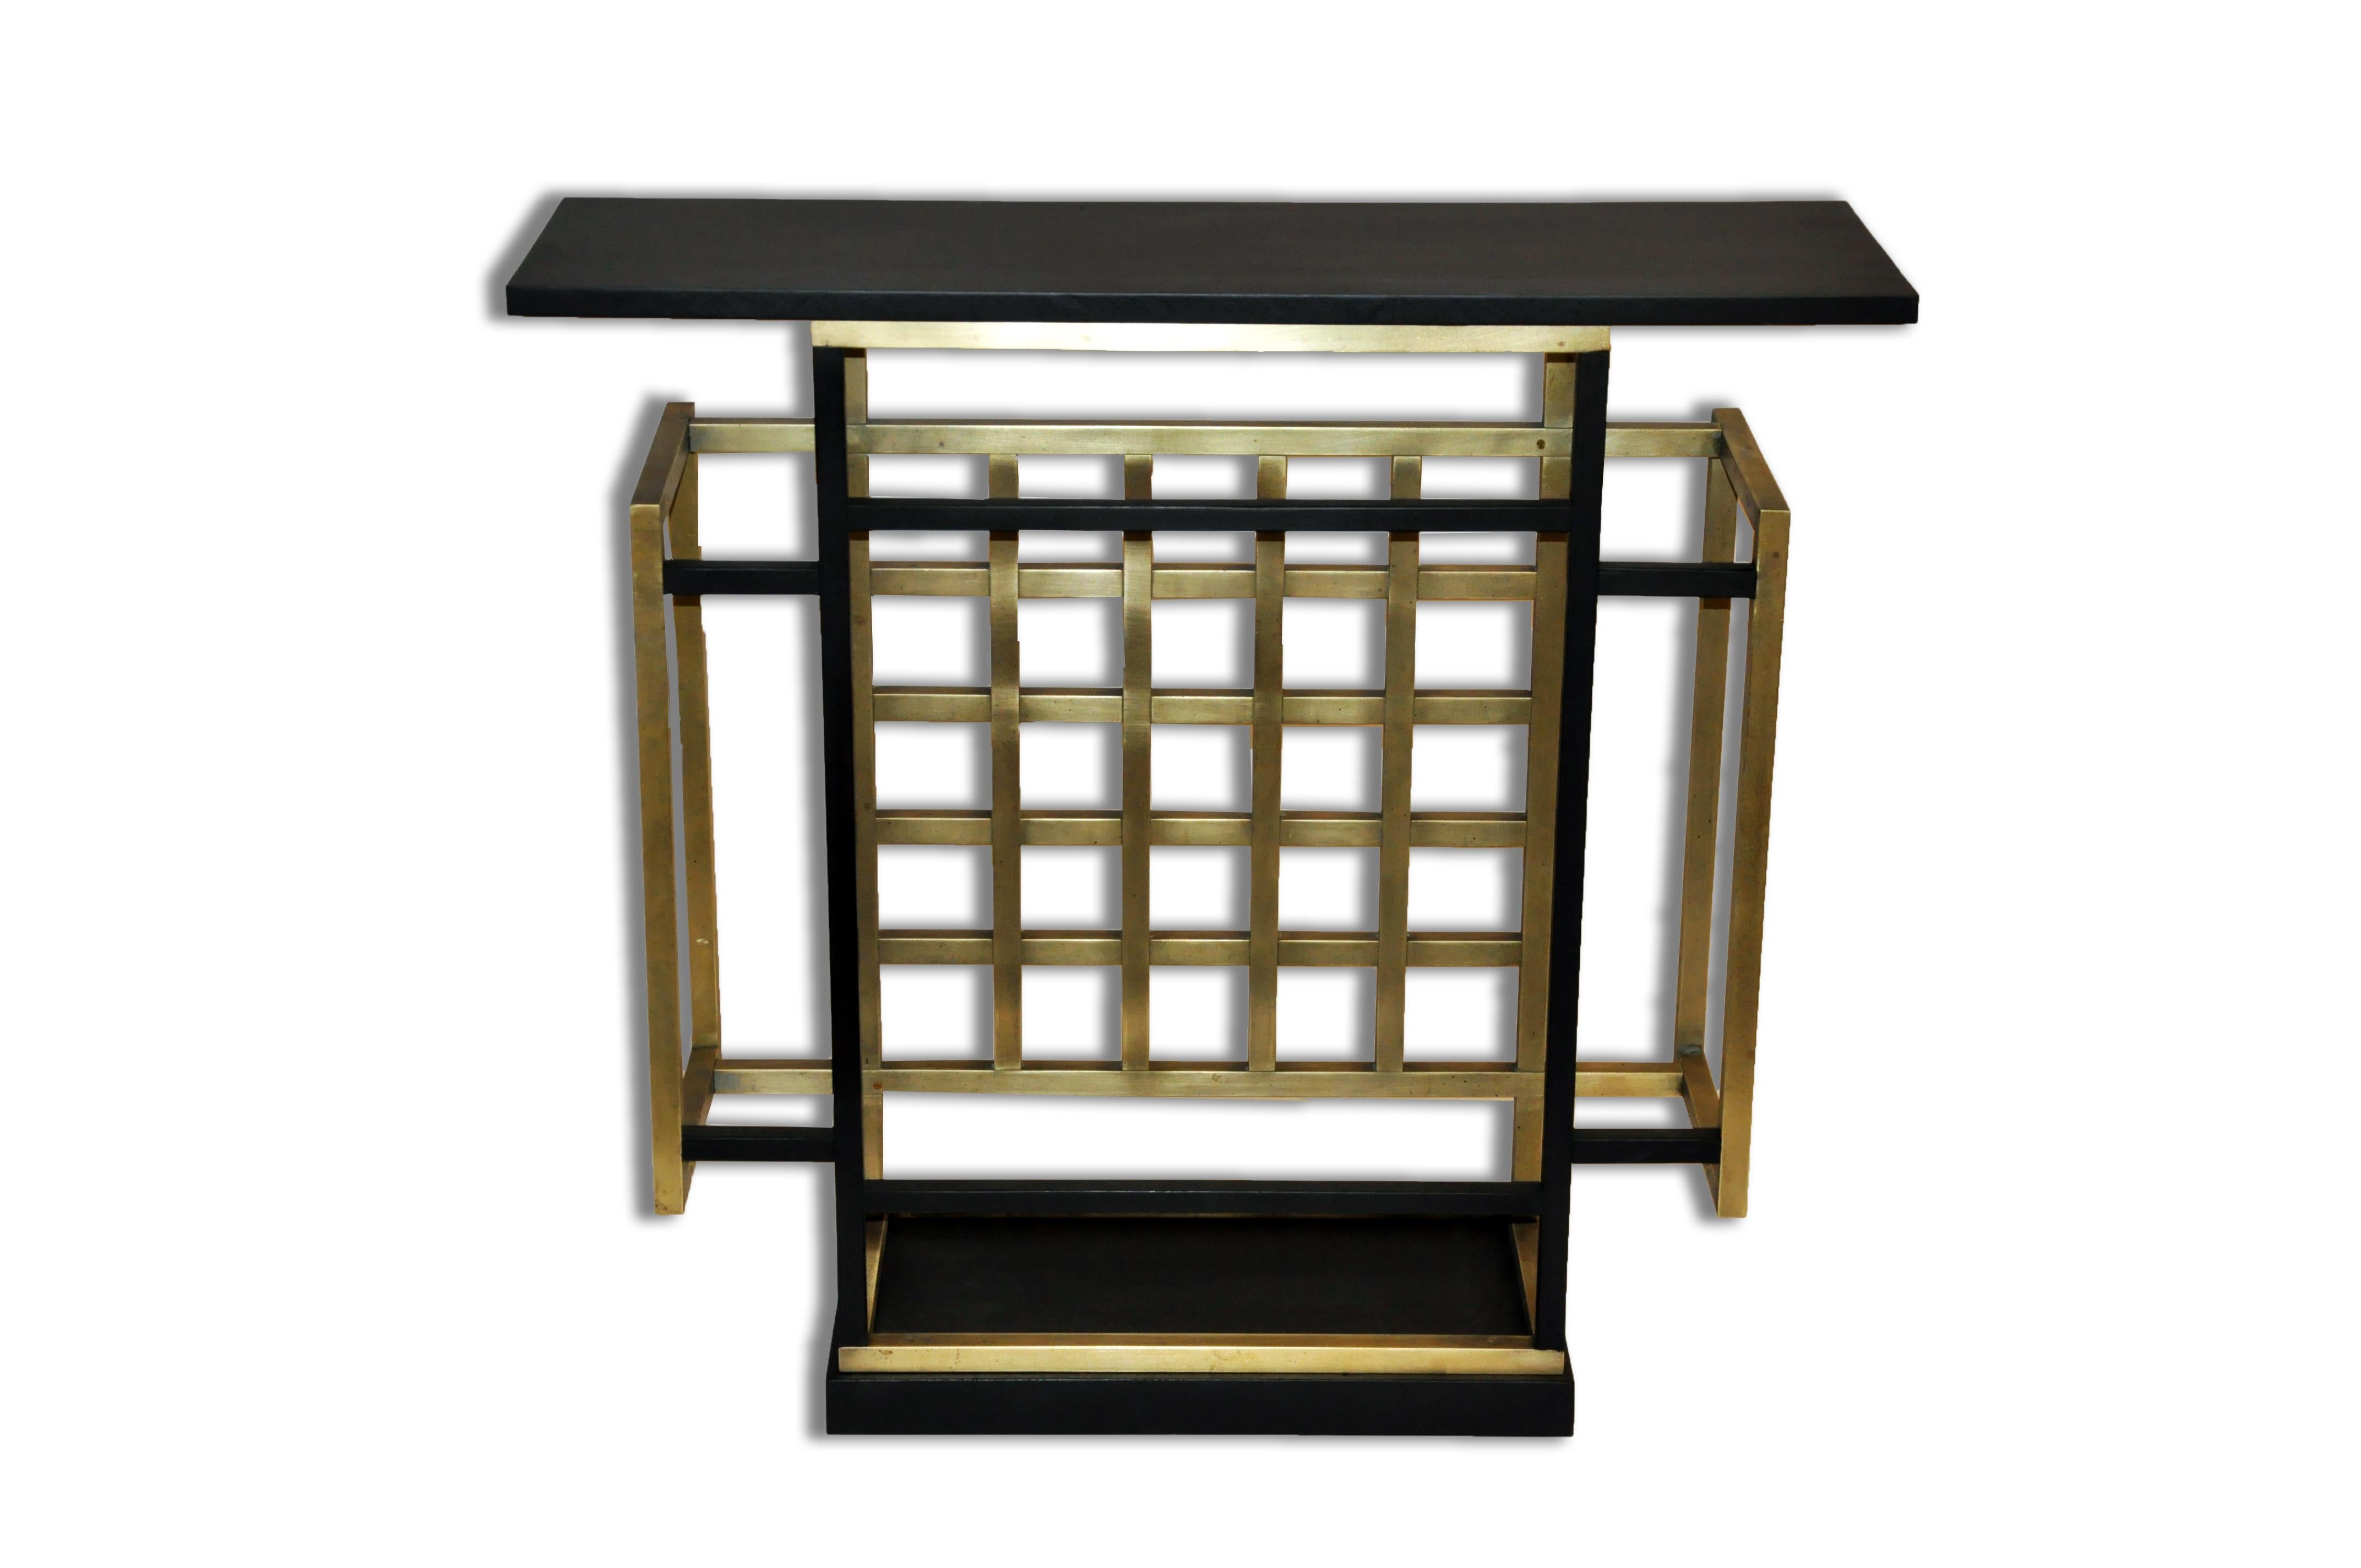 This Mid-Century Modern low table is a handsome convergence of both materials and shapes. Pulling from the Hollywood Regency style of mixed metal and glass, the thick-cut translucent top surmounts the grate-form base. While squares are a primary